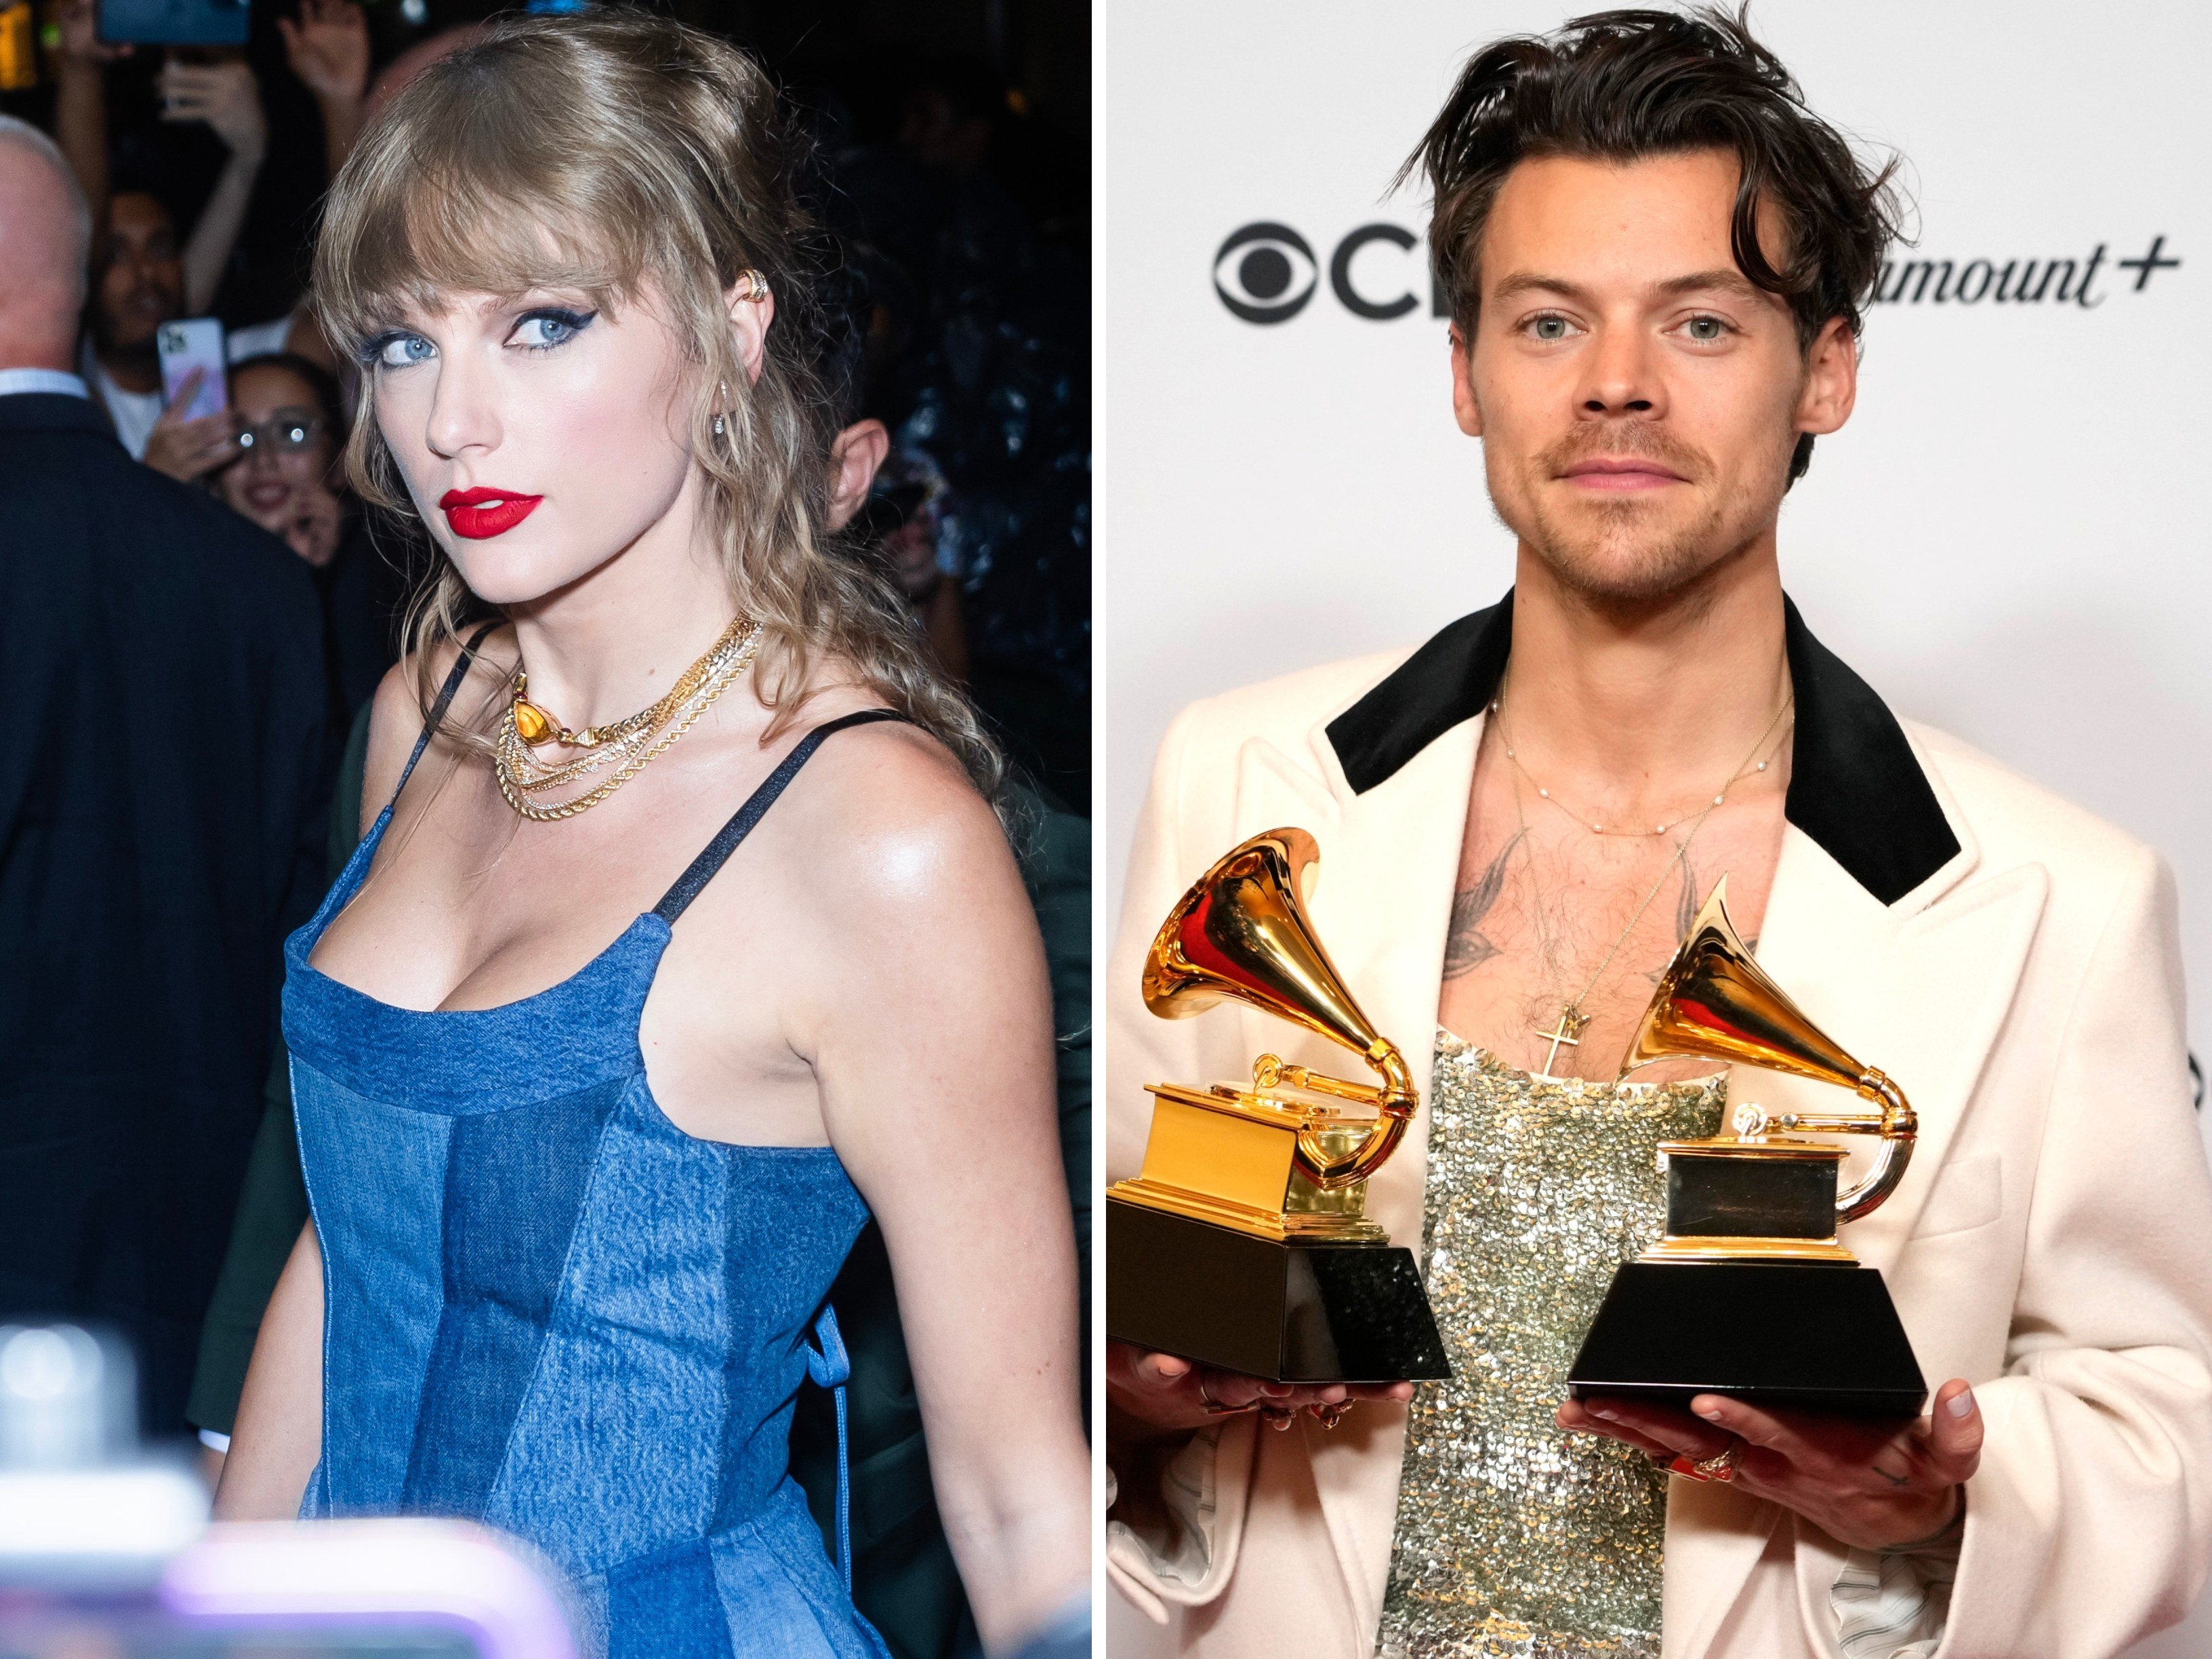 Taylor Swift and Harry Styles: so was 1989 really about him? As